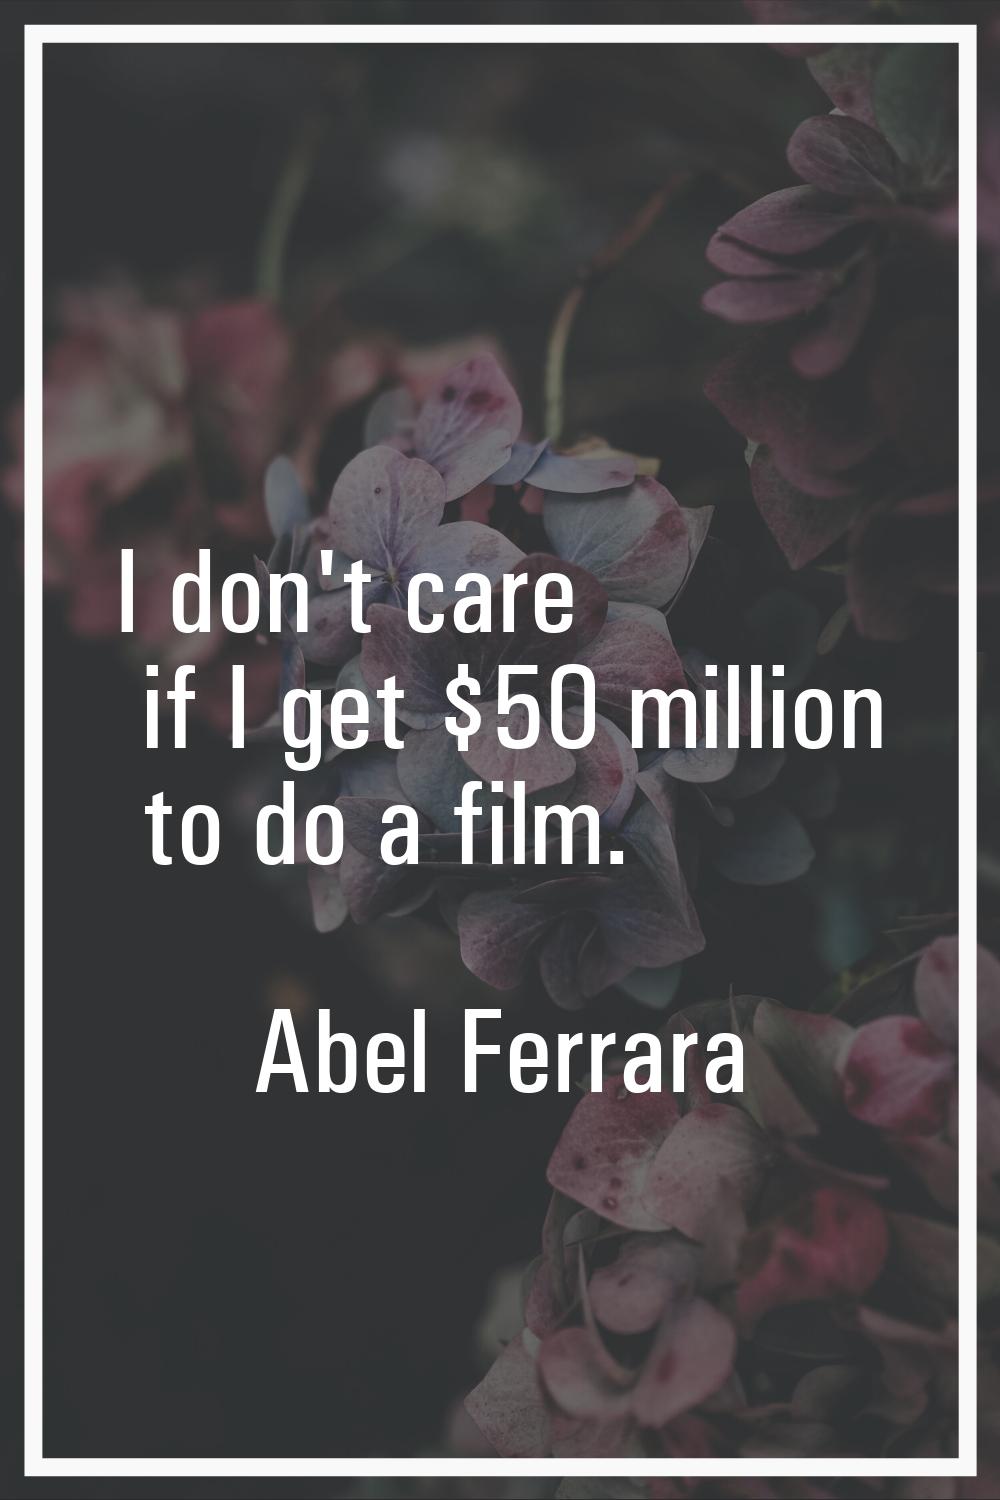 I don't care if I get $50 million to do a film.